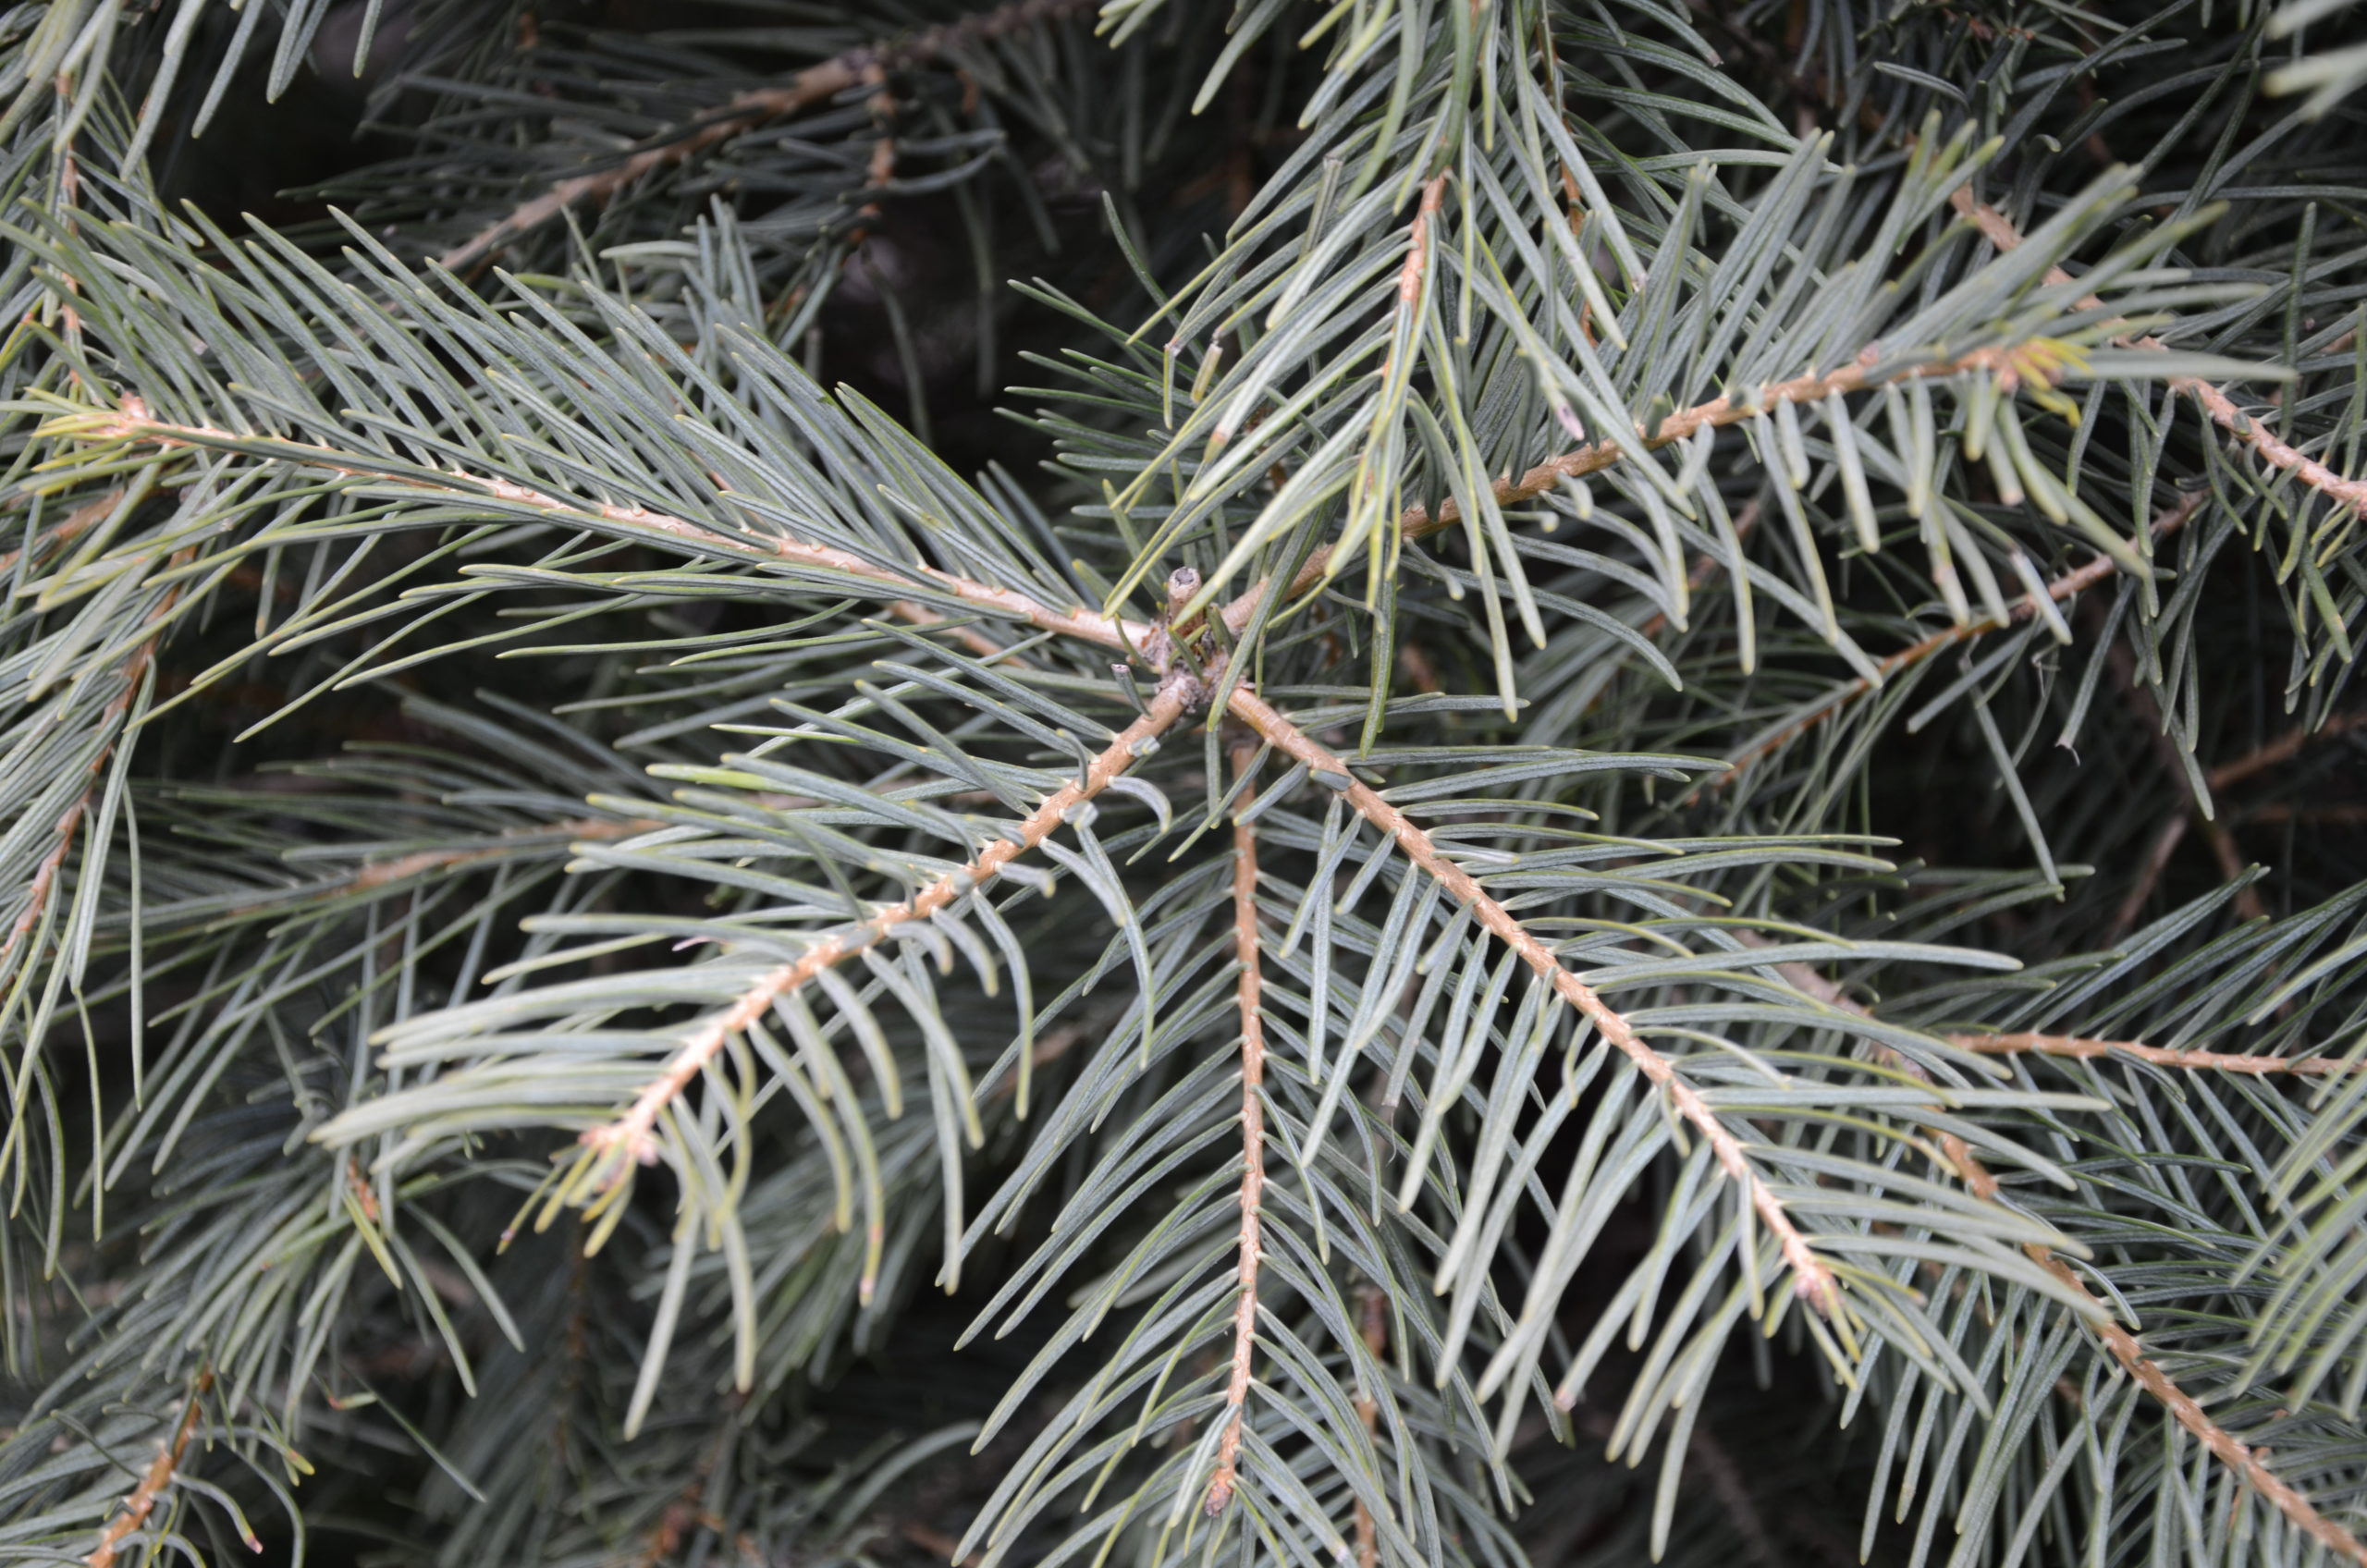 Concolor fir stem. Native to the western part of the country. The needles have a pleasant citrus scent often described as smelling like lemon or orange.